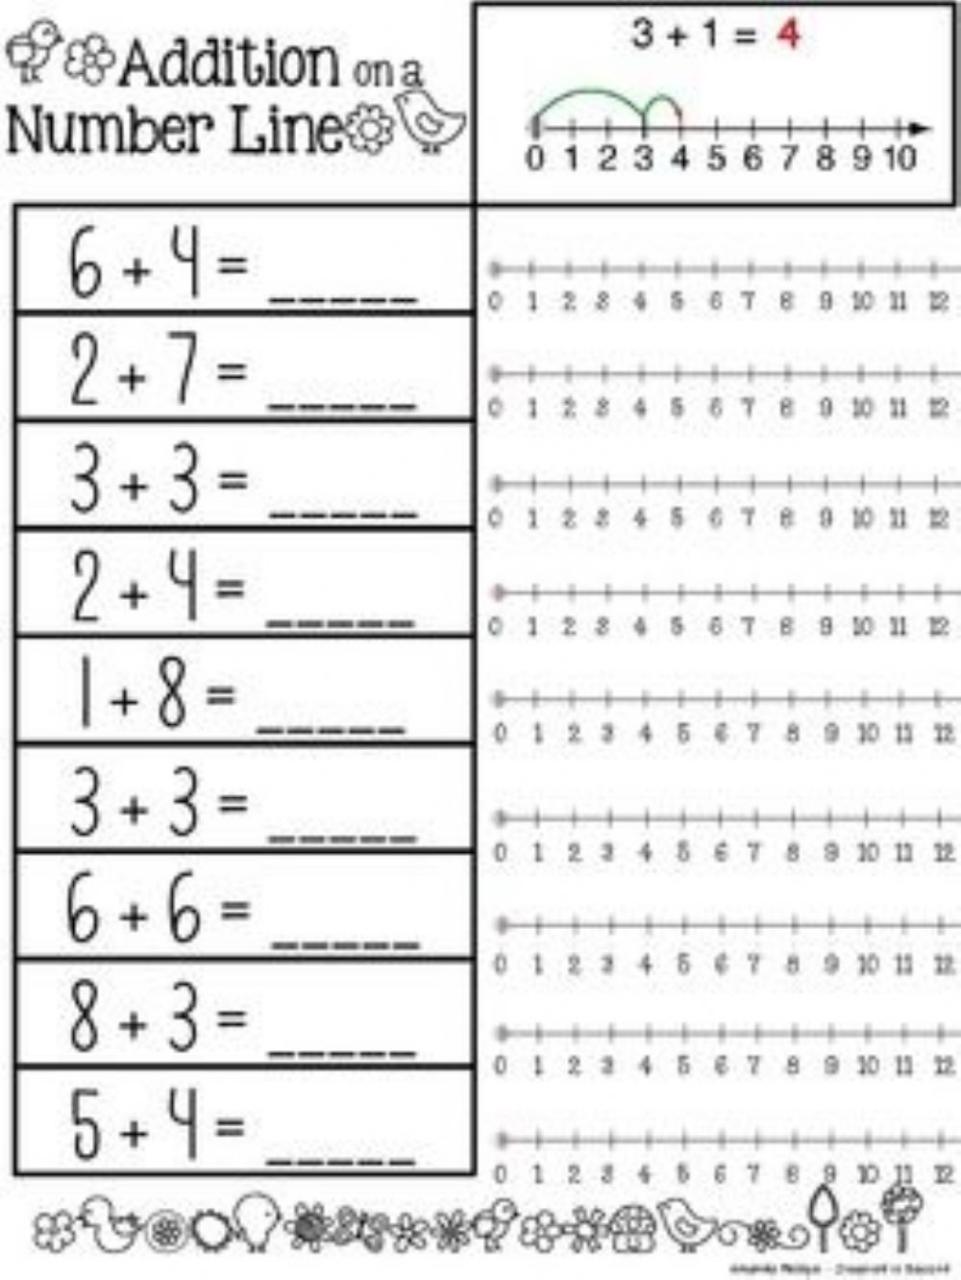 Adding With Number Lines Worksheet